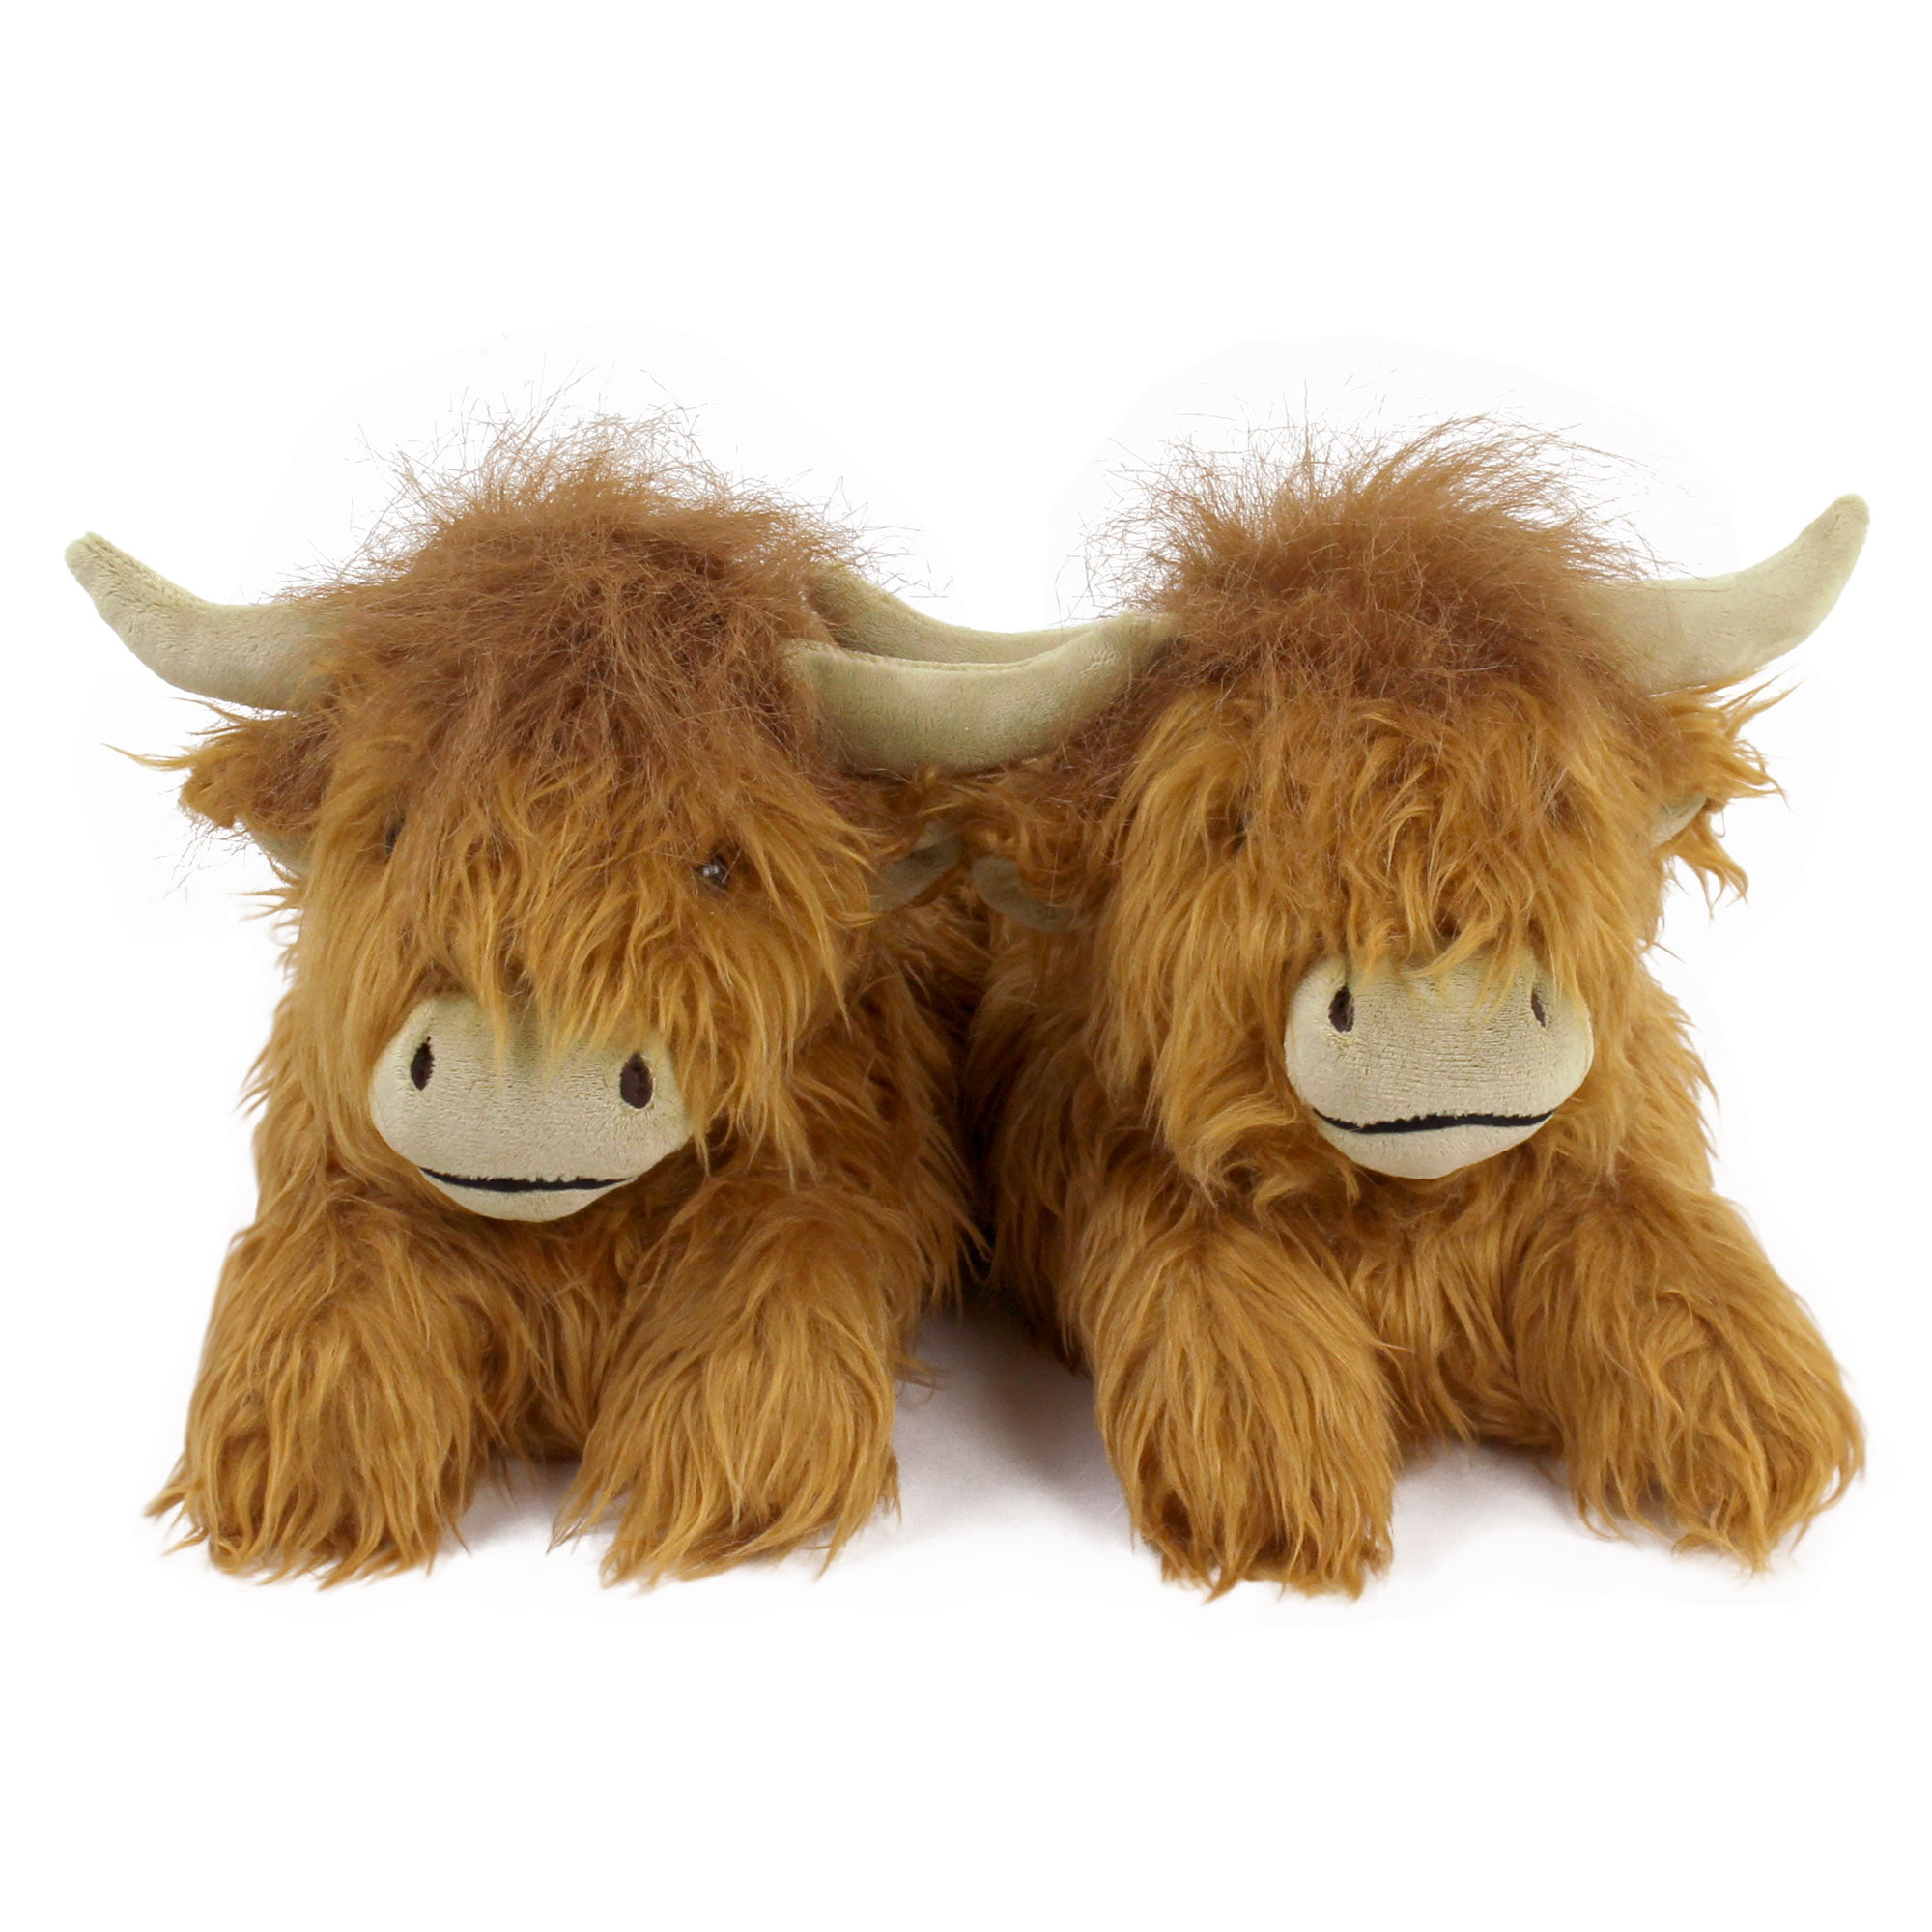 Everberry - Highland Cattle Slippers 